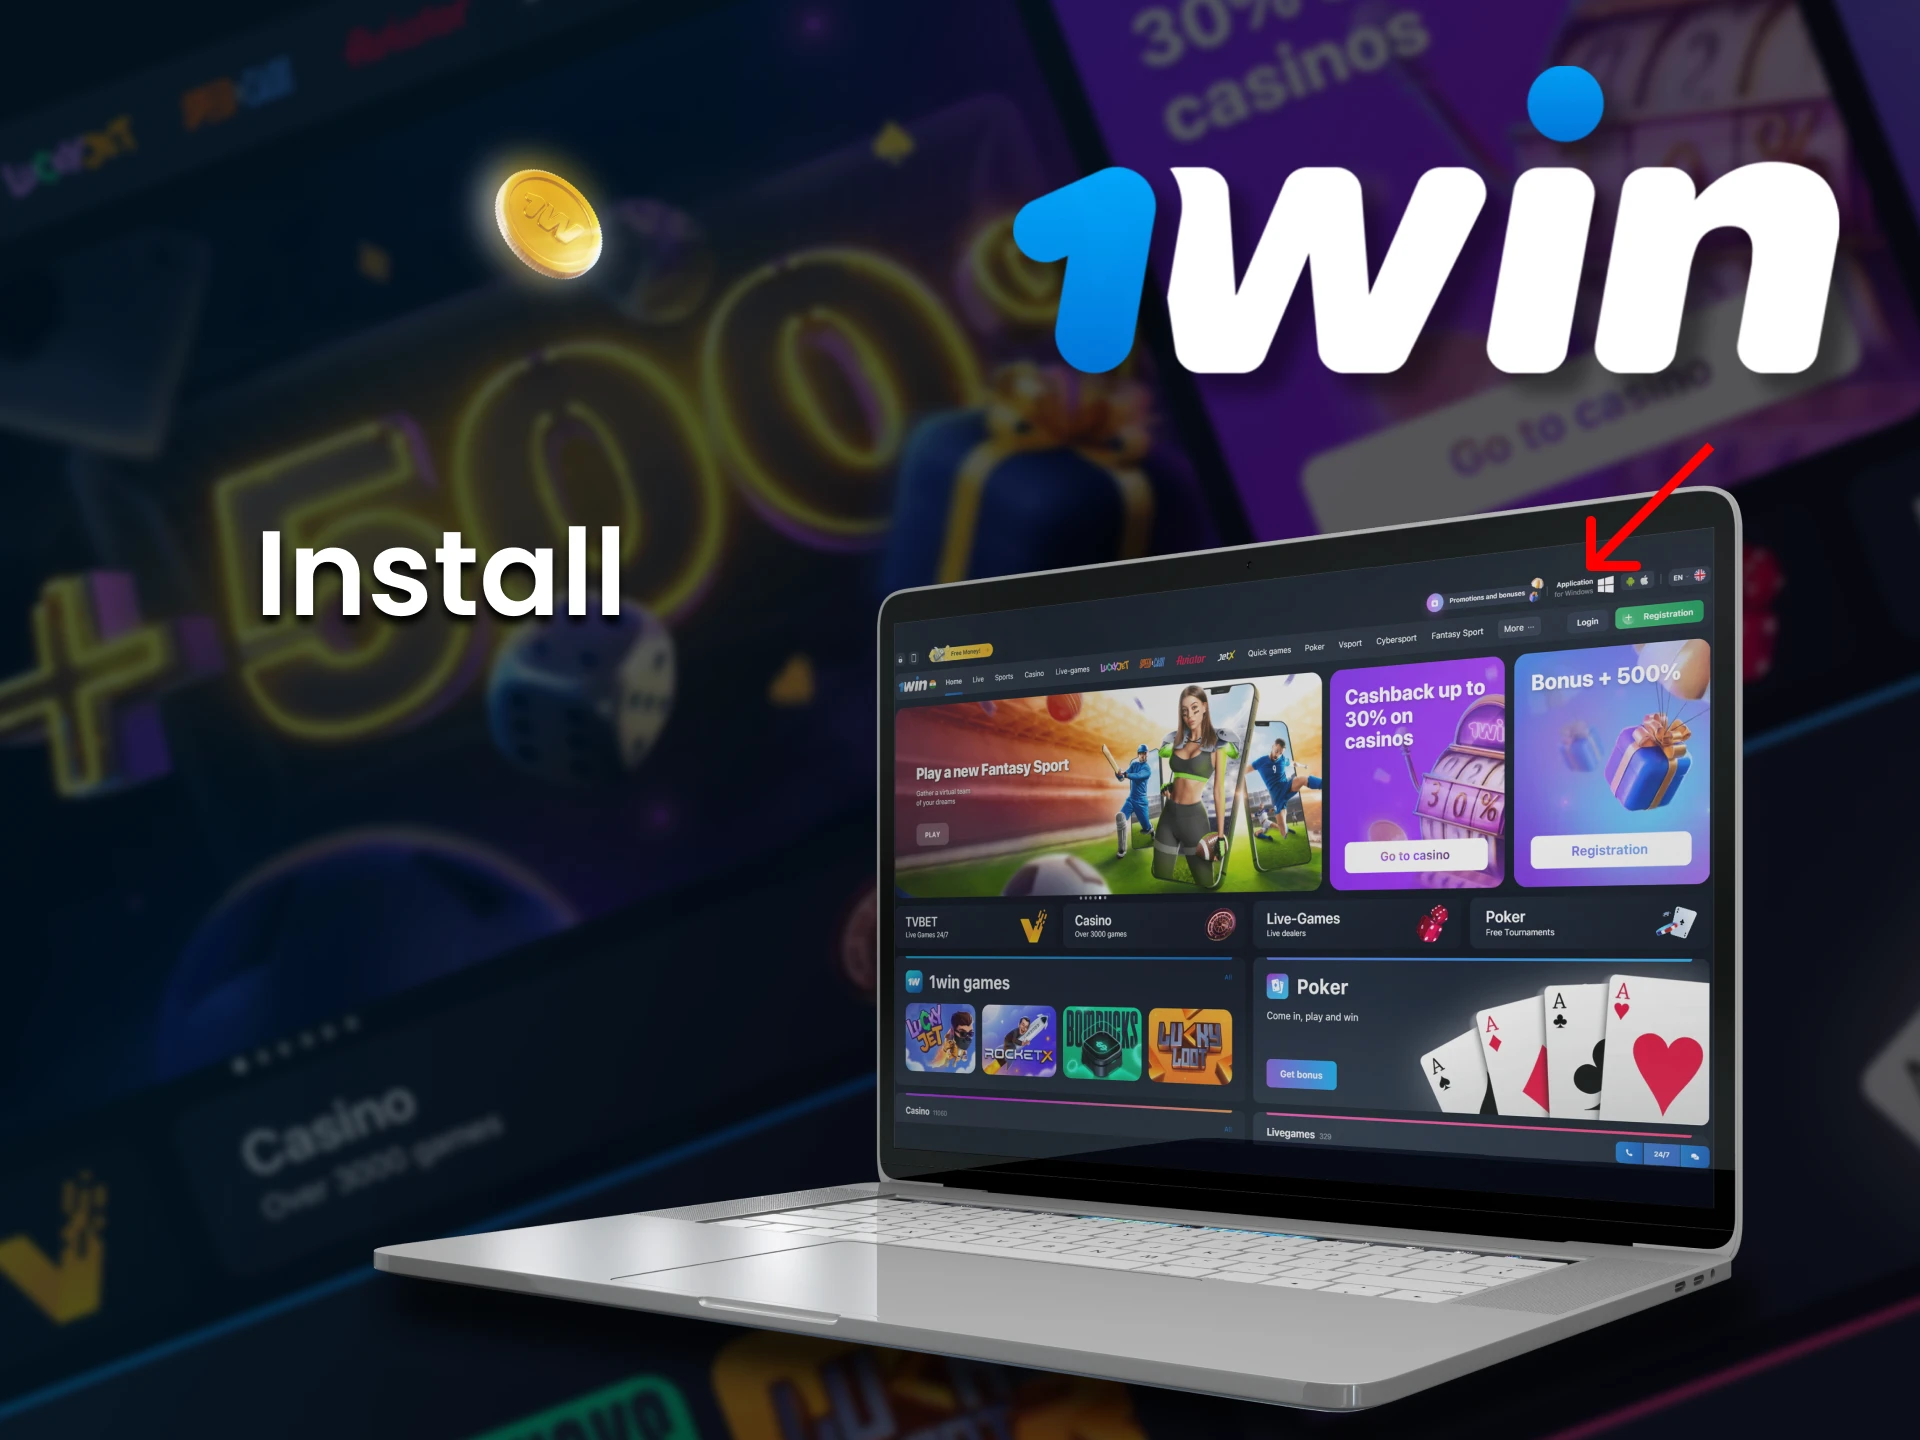 Install the 1win application for PC.